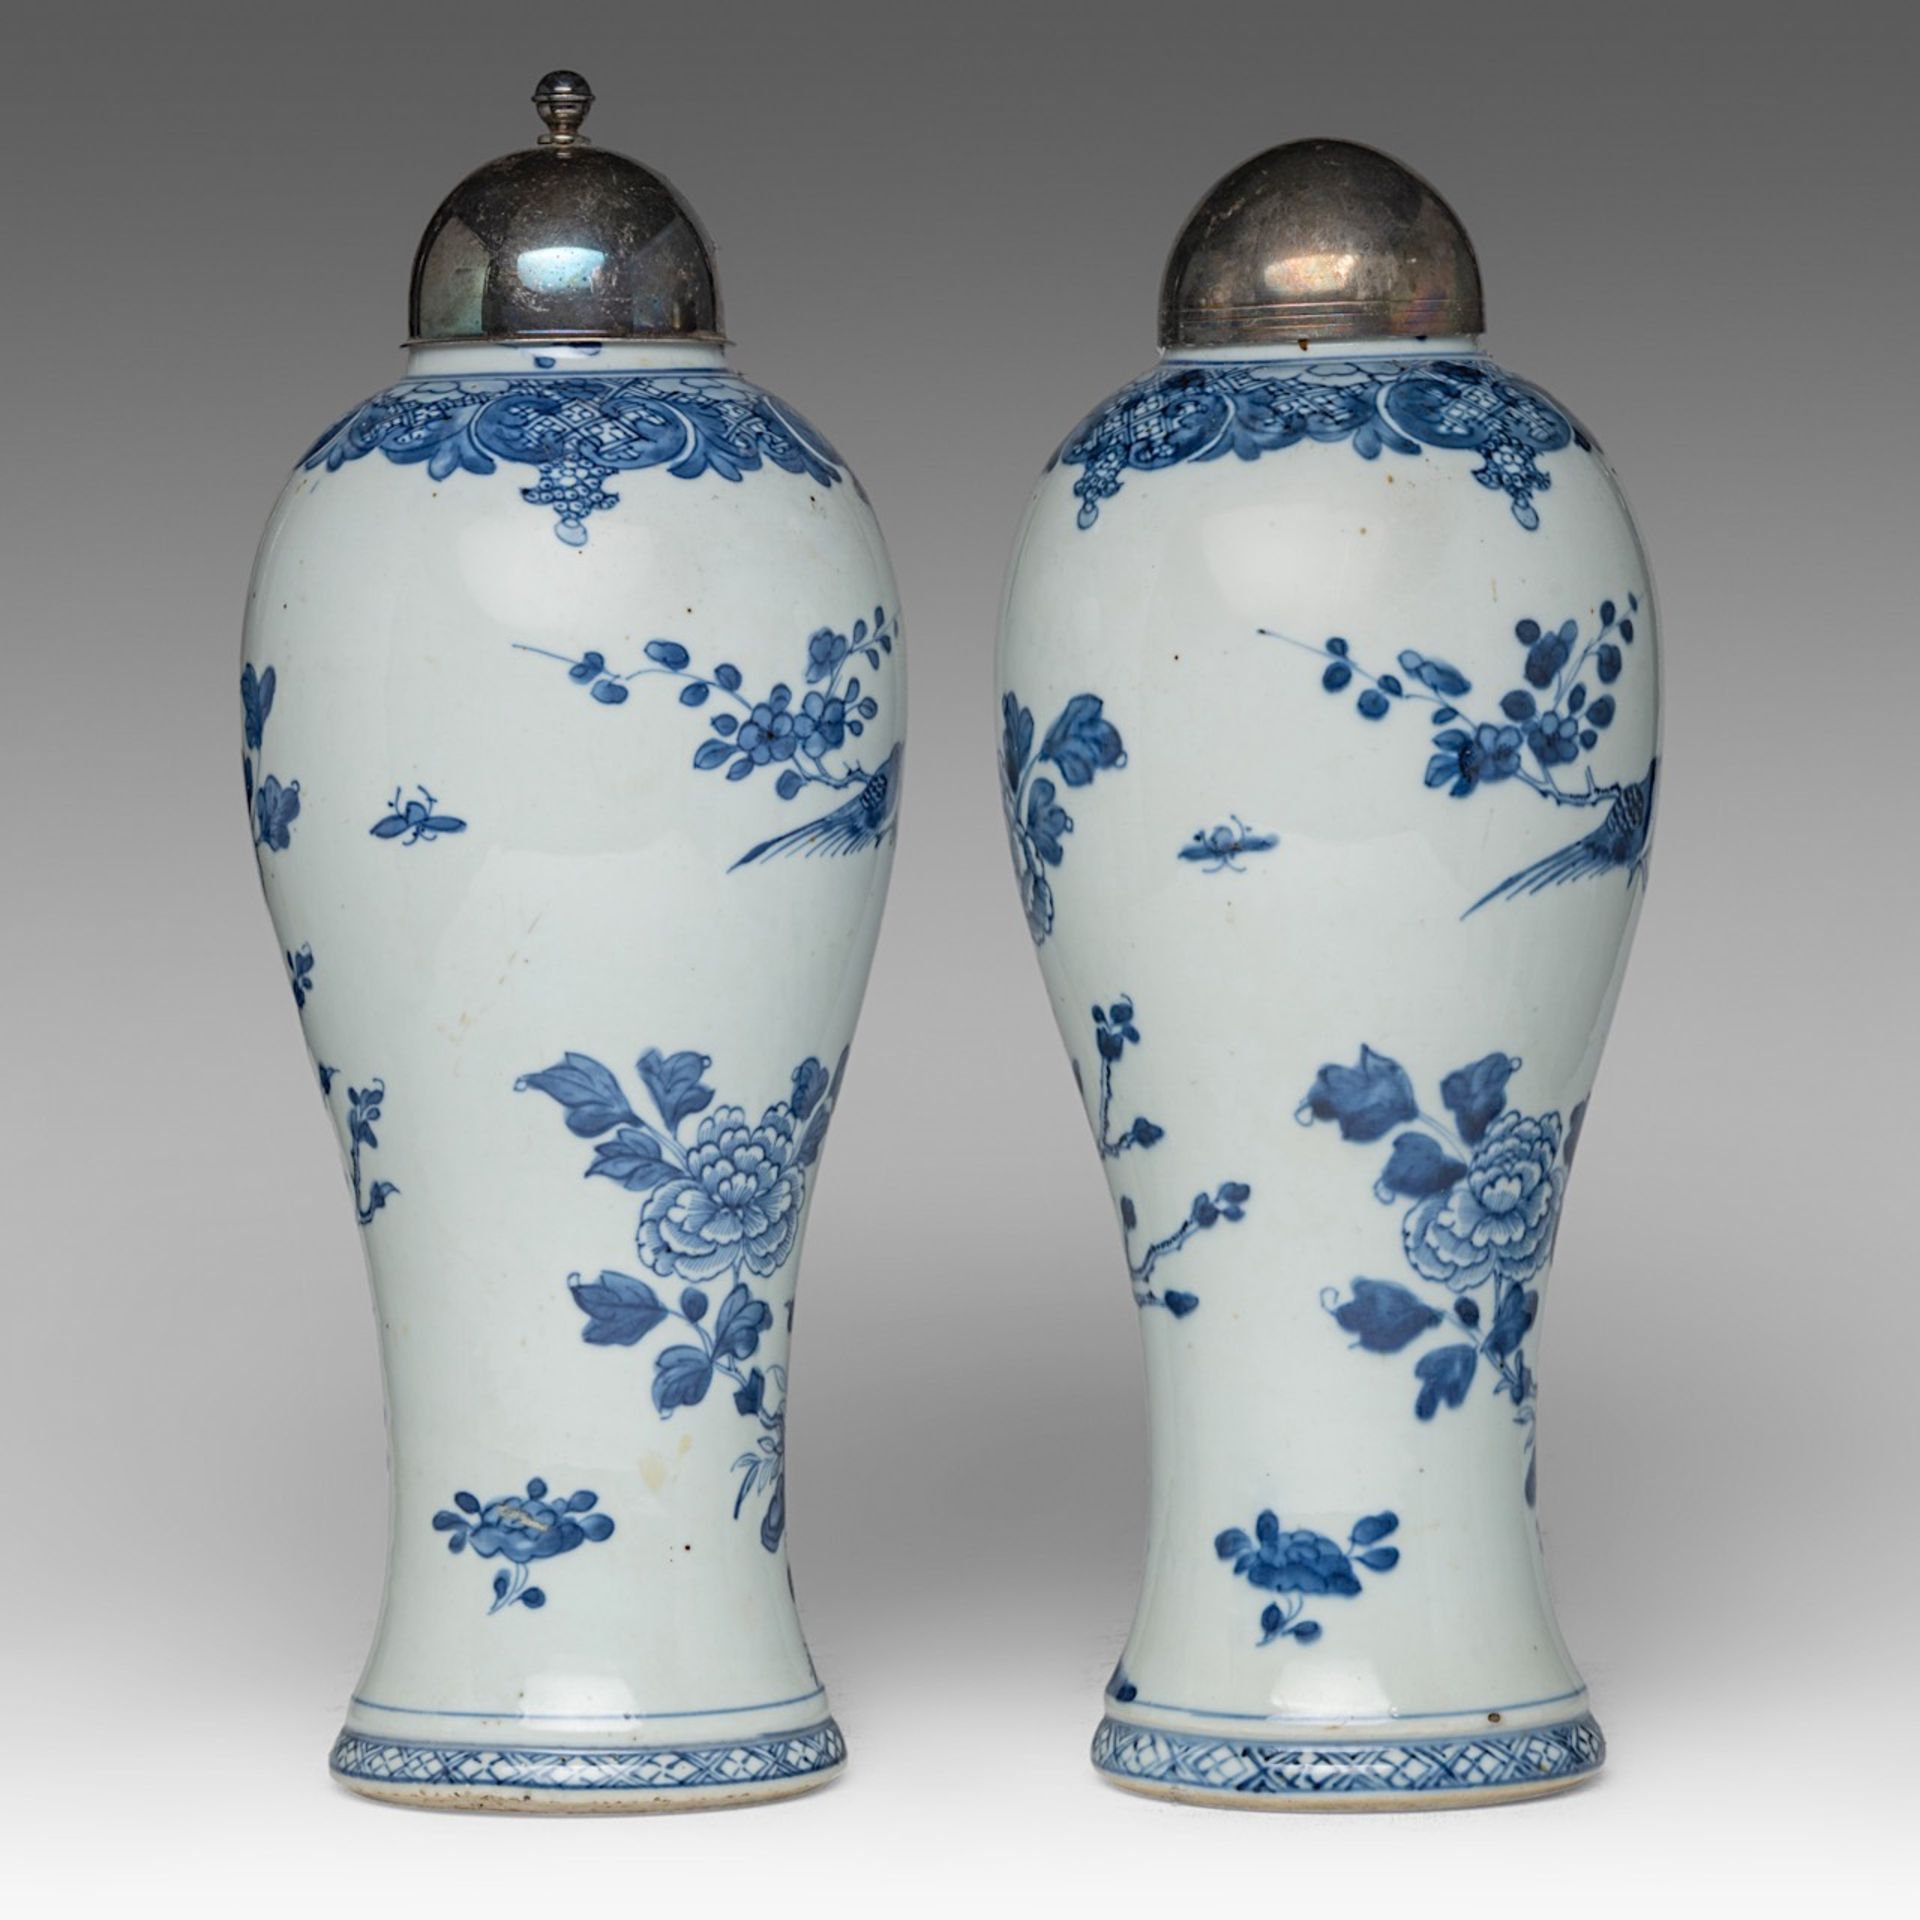 A similar pair of Chinese blue and white 'Flower Garden' baluster vases, Qianlong period, total H 36 - Image 3 of 6